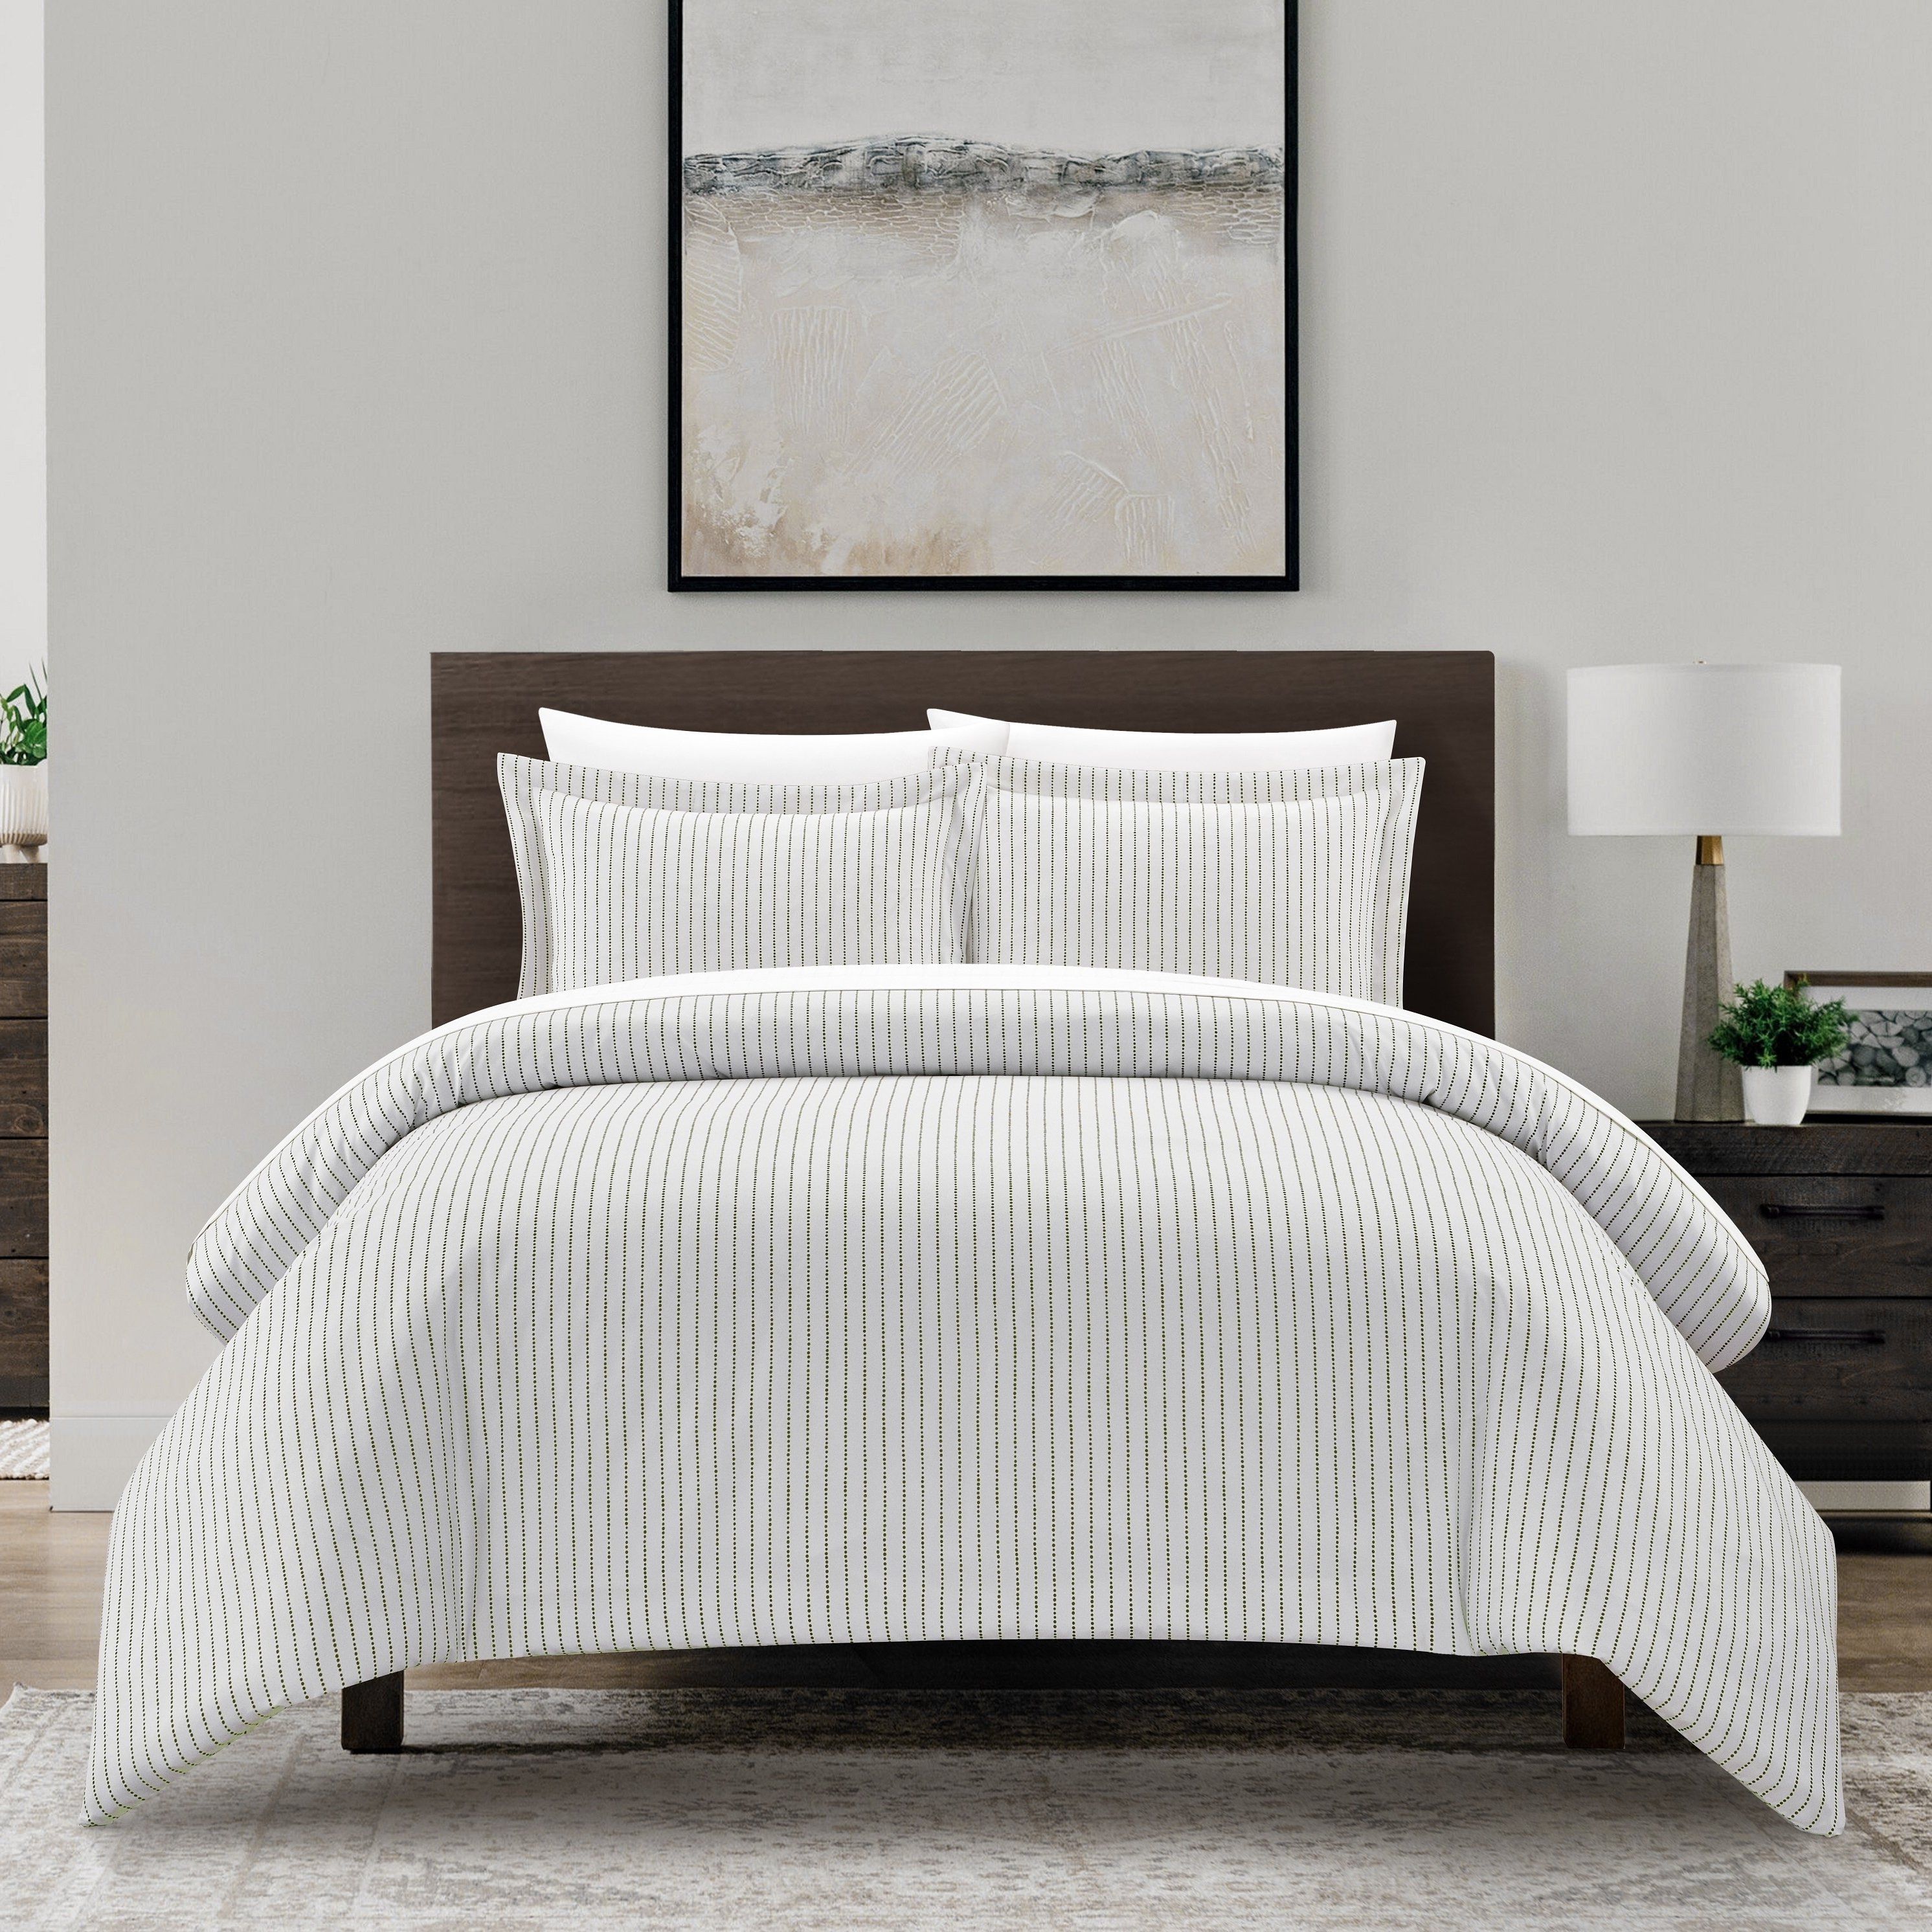 Vasey 2 Or 3 Piece Duvet Cover Set Contemporary Solid White With Dot Striped - Charcoal, King